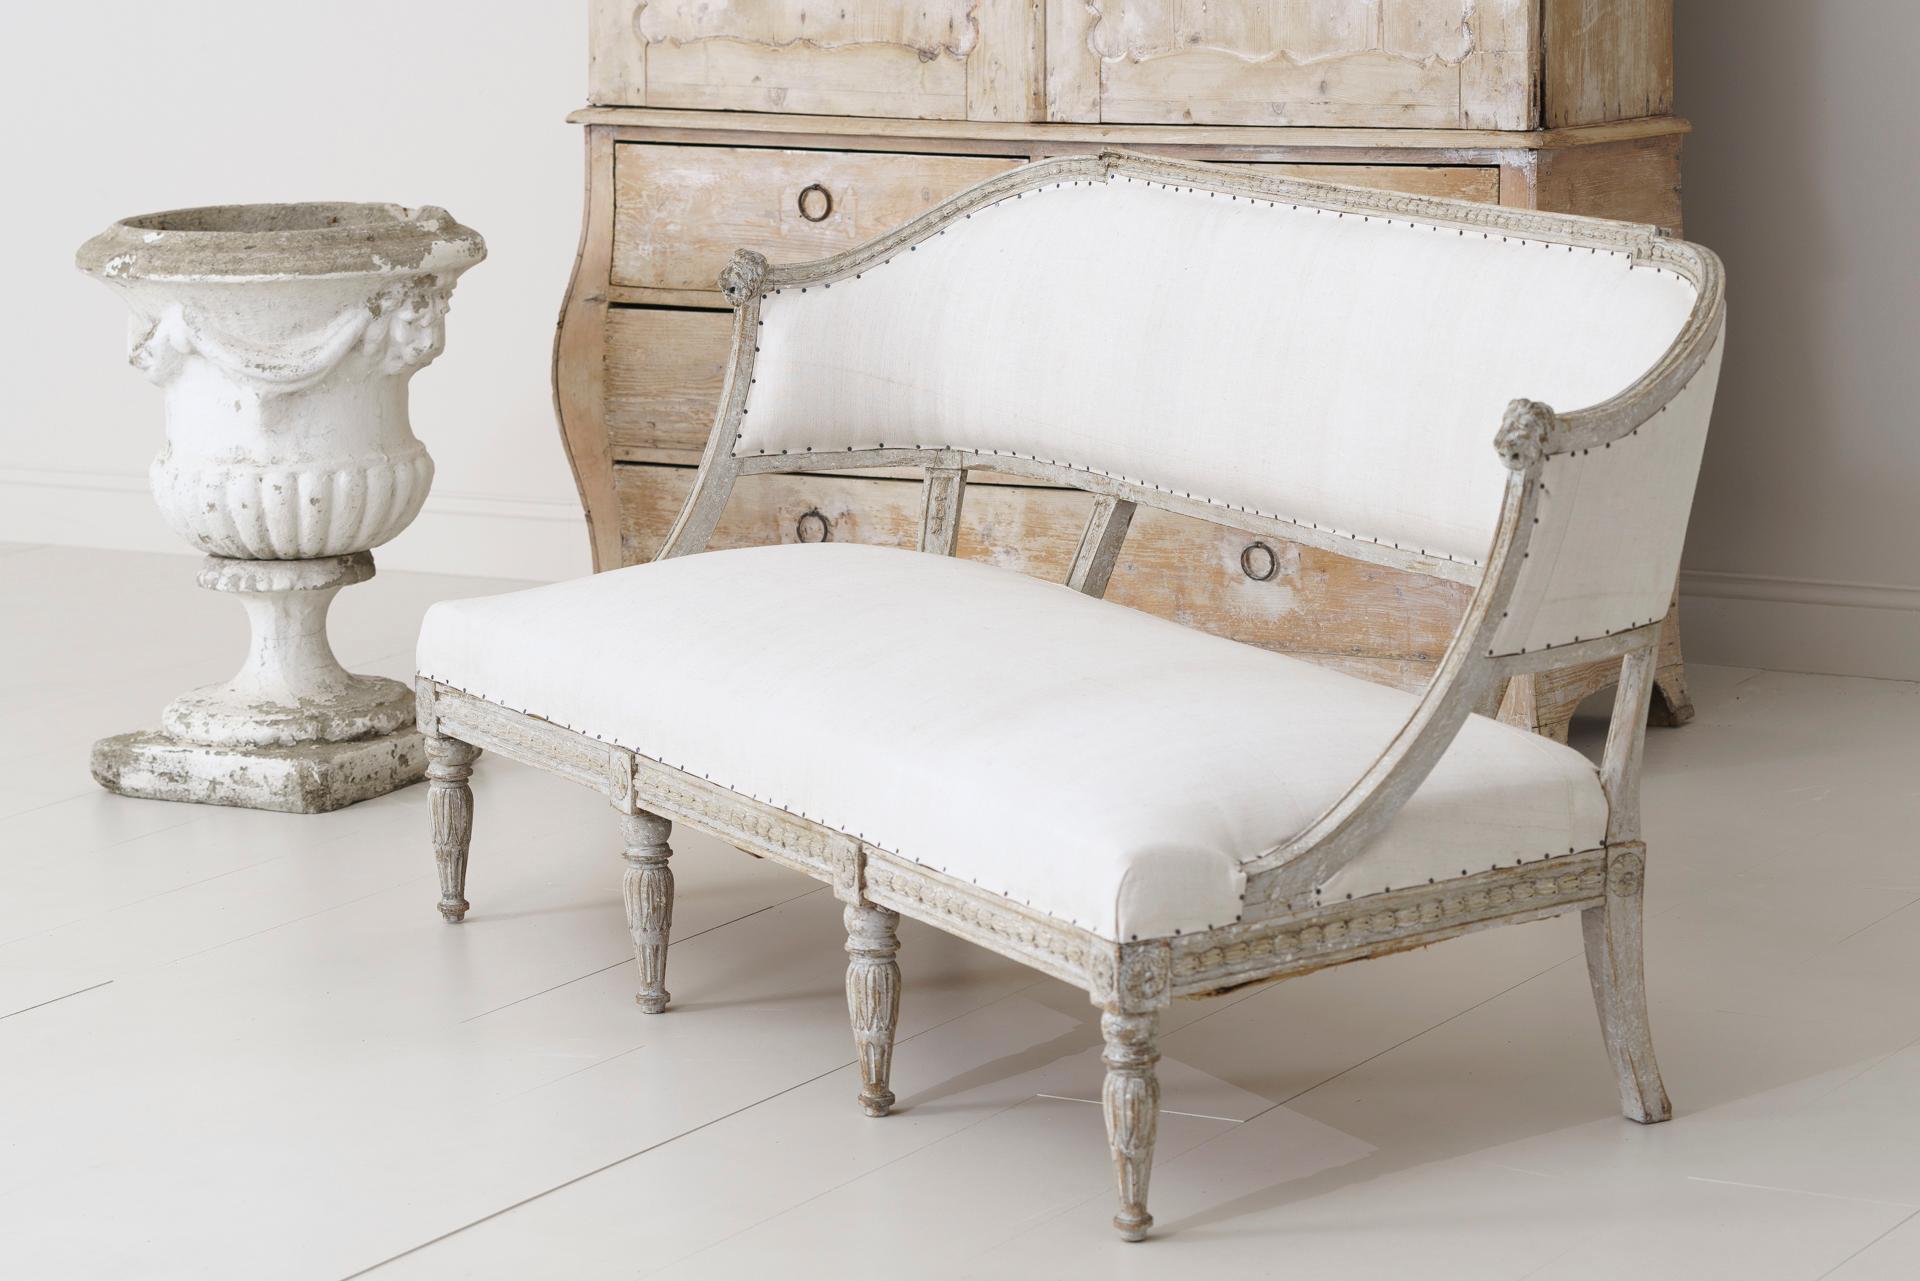 A 19th century Swedish barrel back sofa settee in the Gustavian style, newly upholstered in antique linen, circa 1850. Hand scraped to reveal the original paint. The frame features carved lion heads and bell flowers while the front legs are adorned